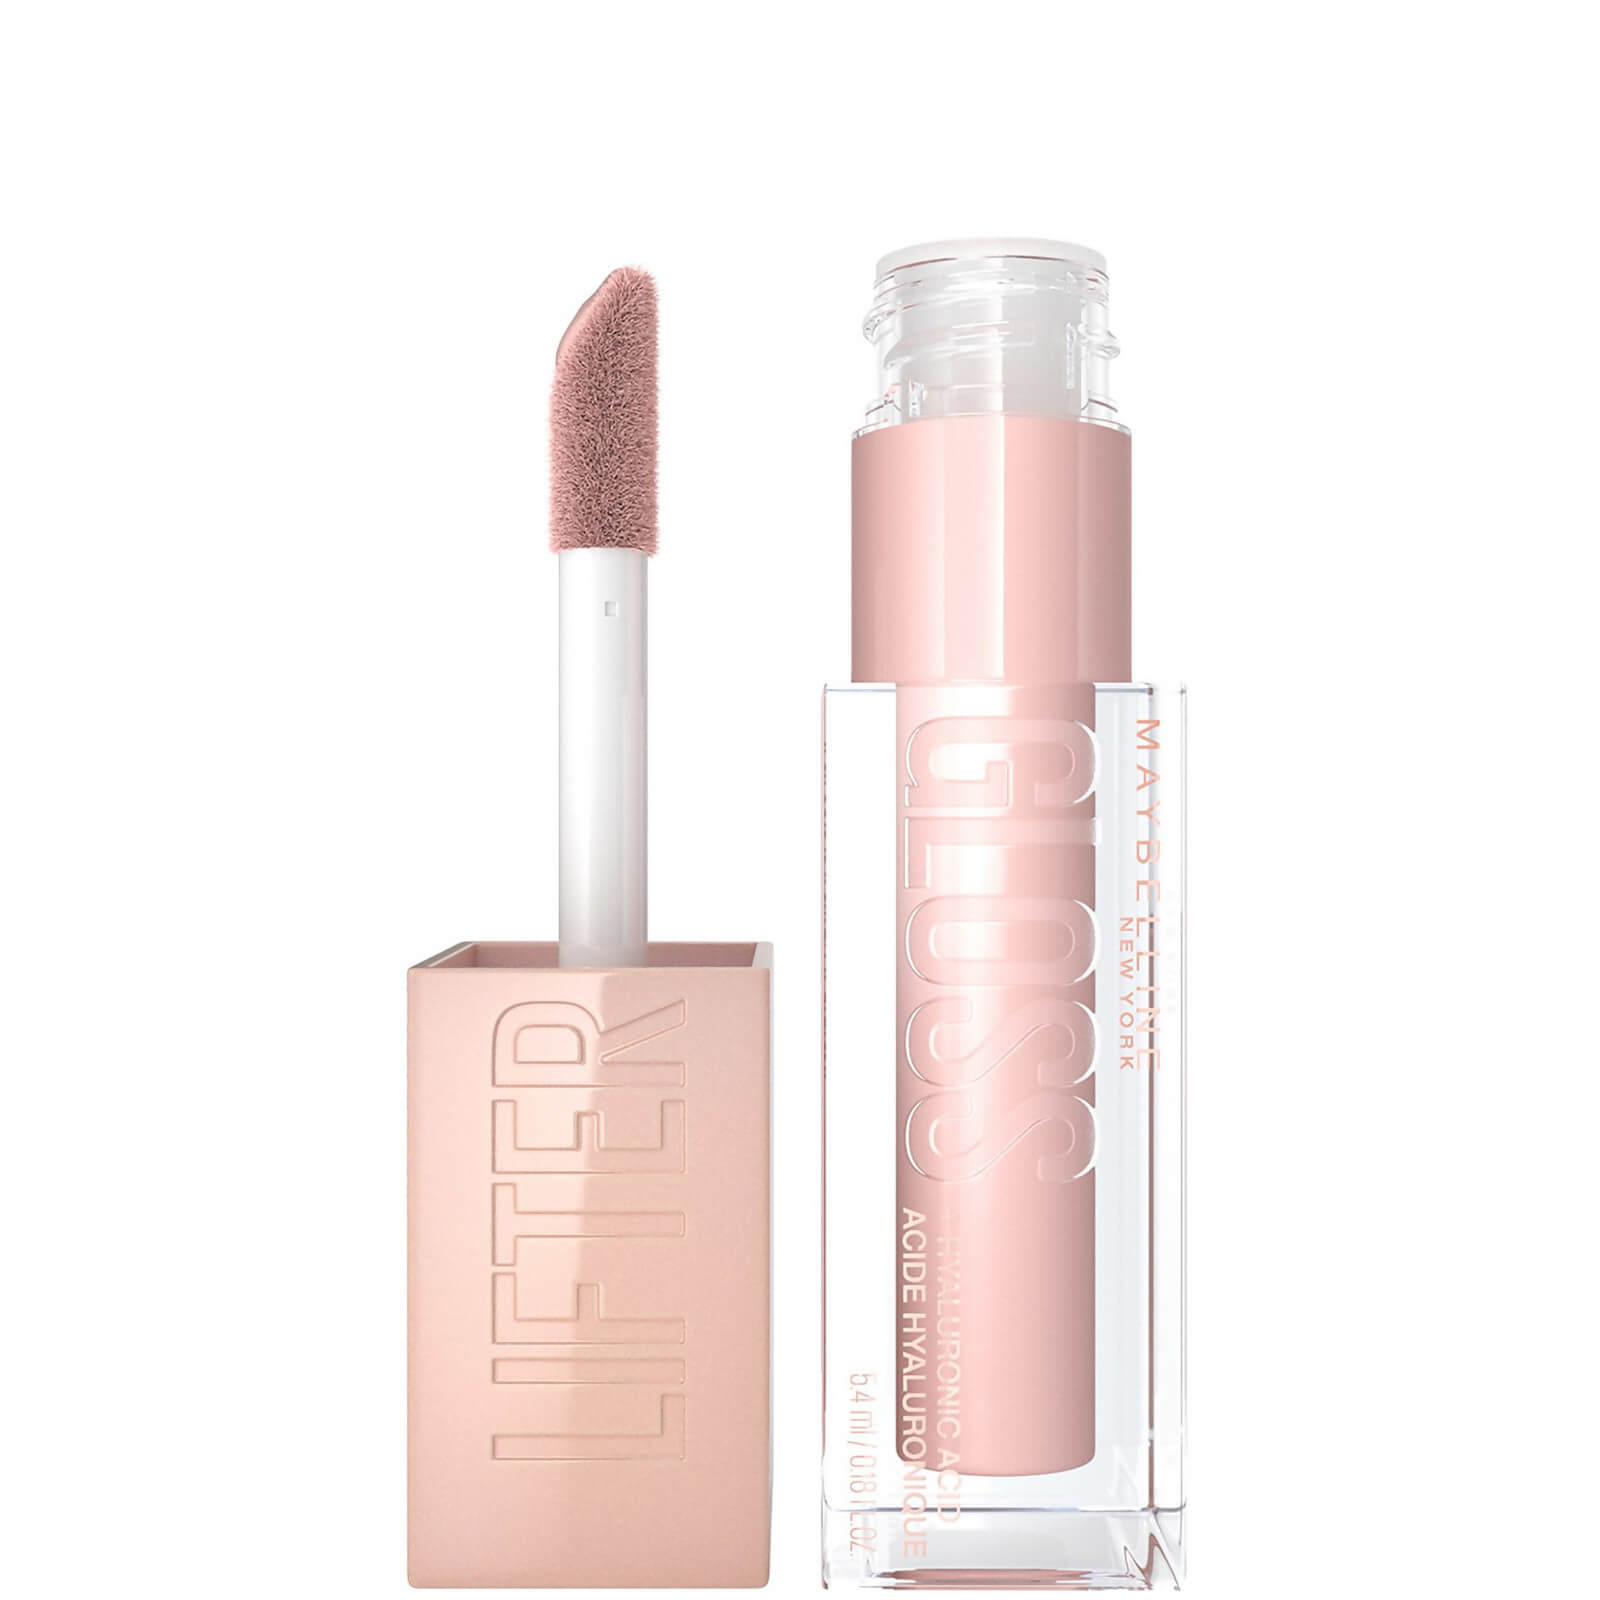 Image of Maybelline Lifter Gloss Hydrating Lip Gloss with Hyaluronic Acid 5g (Various Shades) - 002 Ice